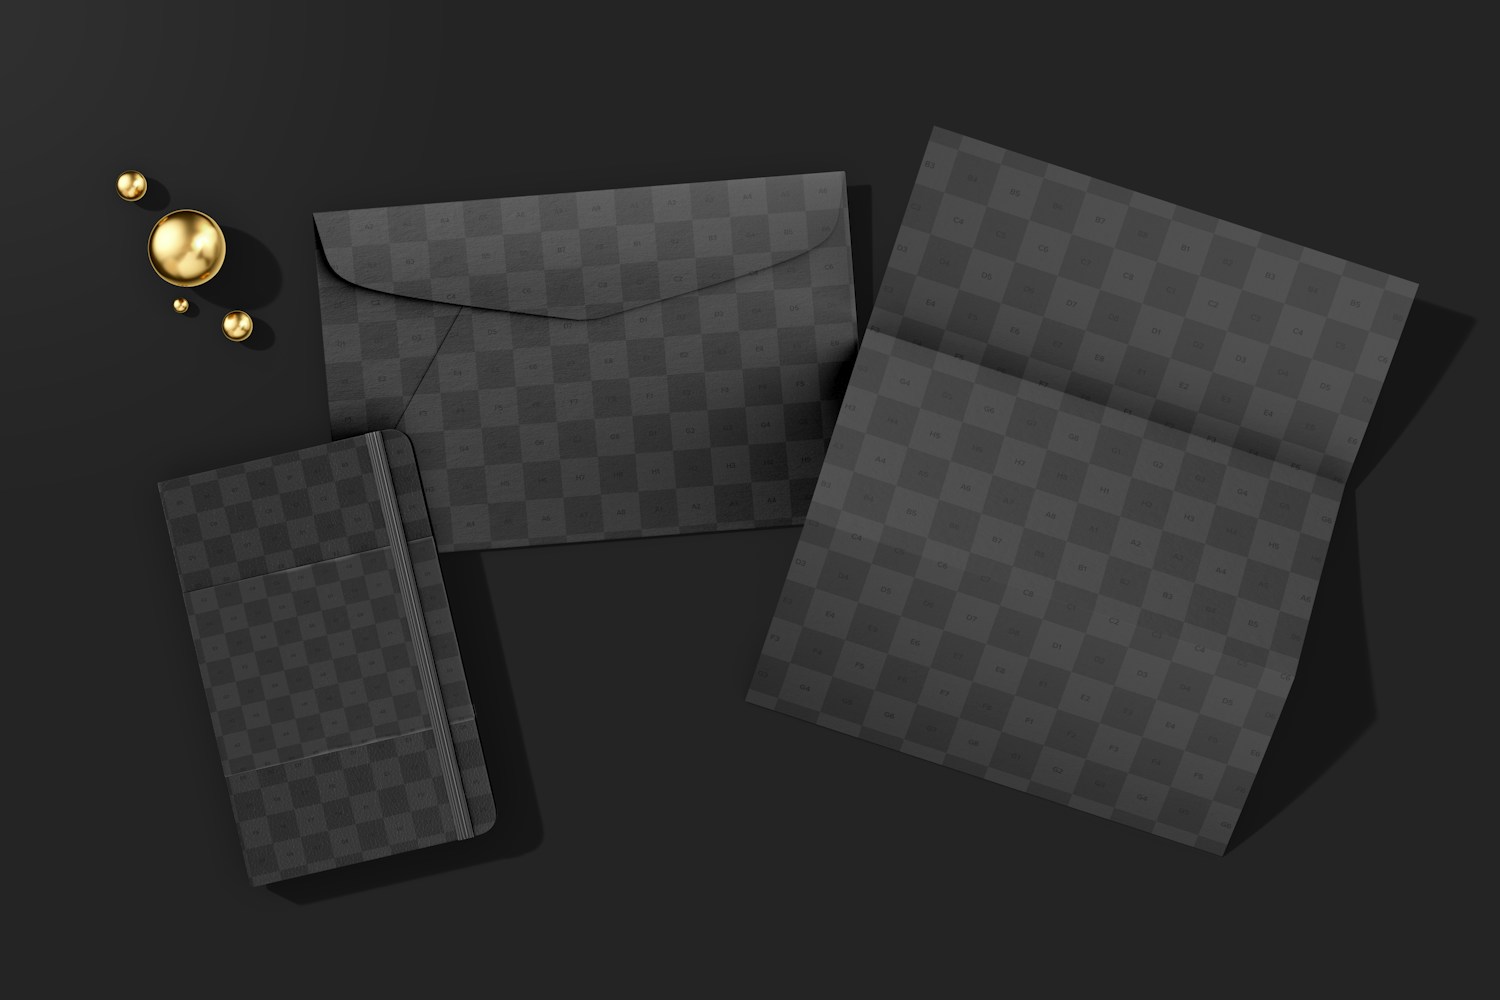 Luxury Letterhead Mockup, with Leather Notebook